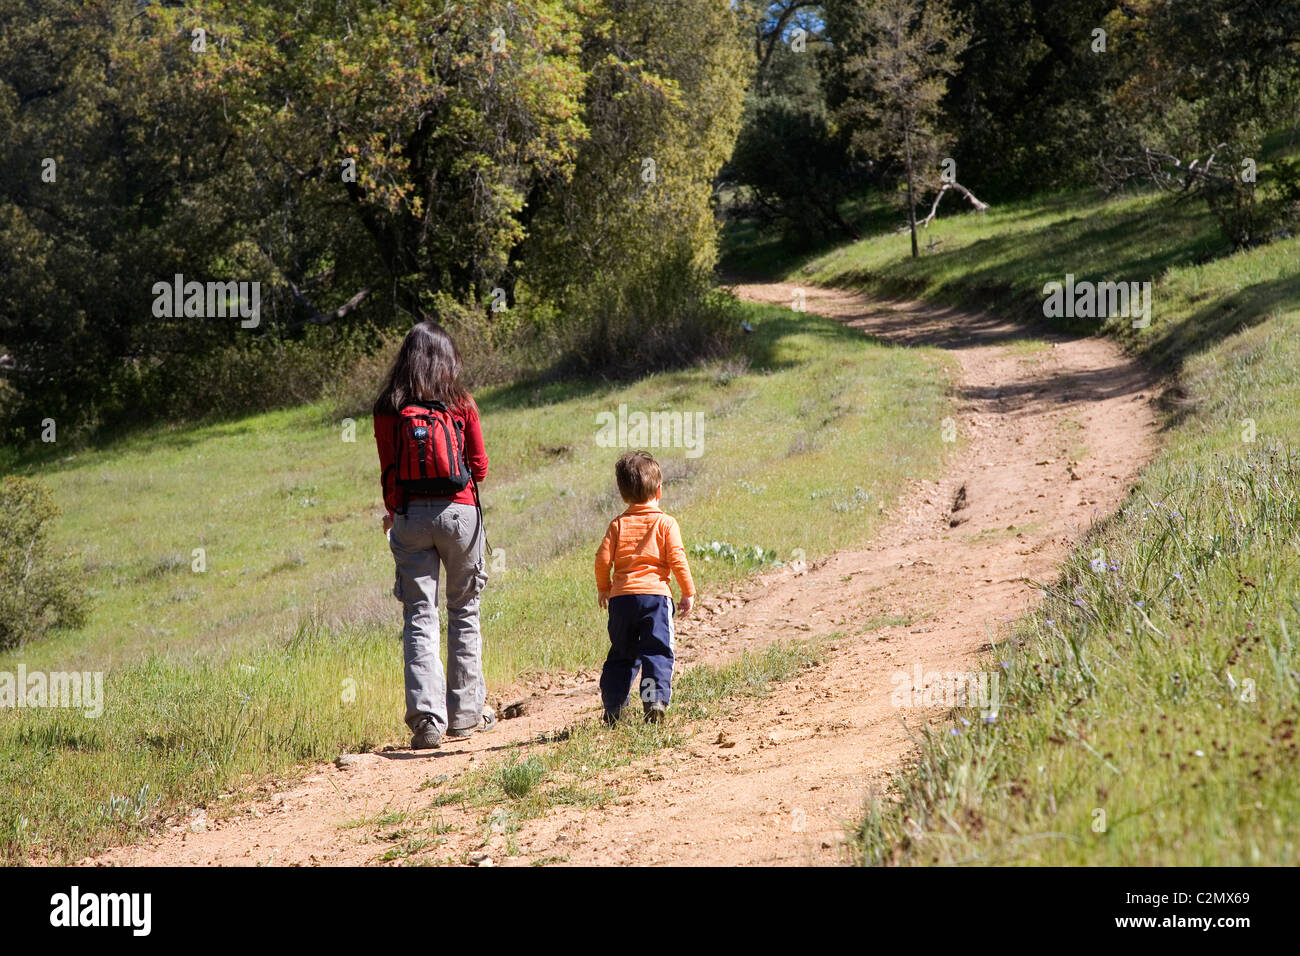 Mother and 3 year old son hiking, Santa Ysabel Open Space, San Diego County, California Stock Photo